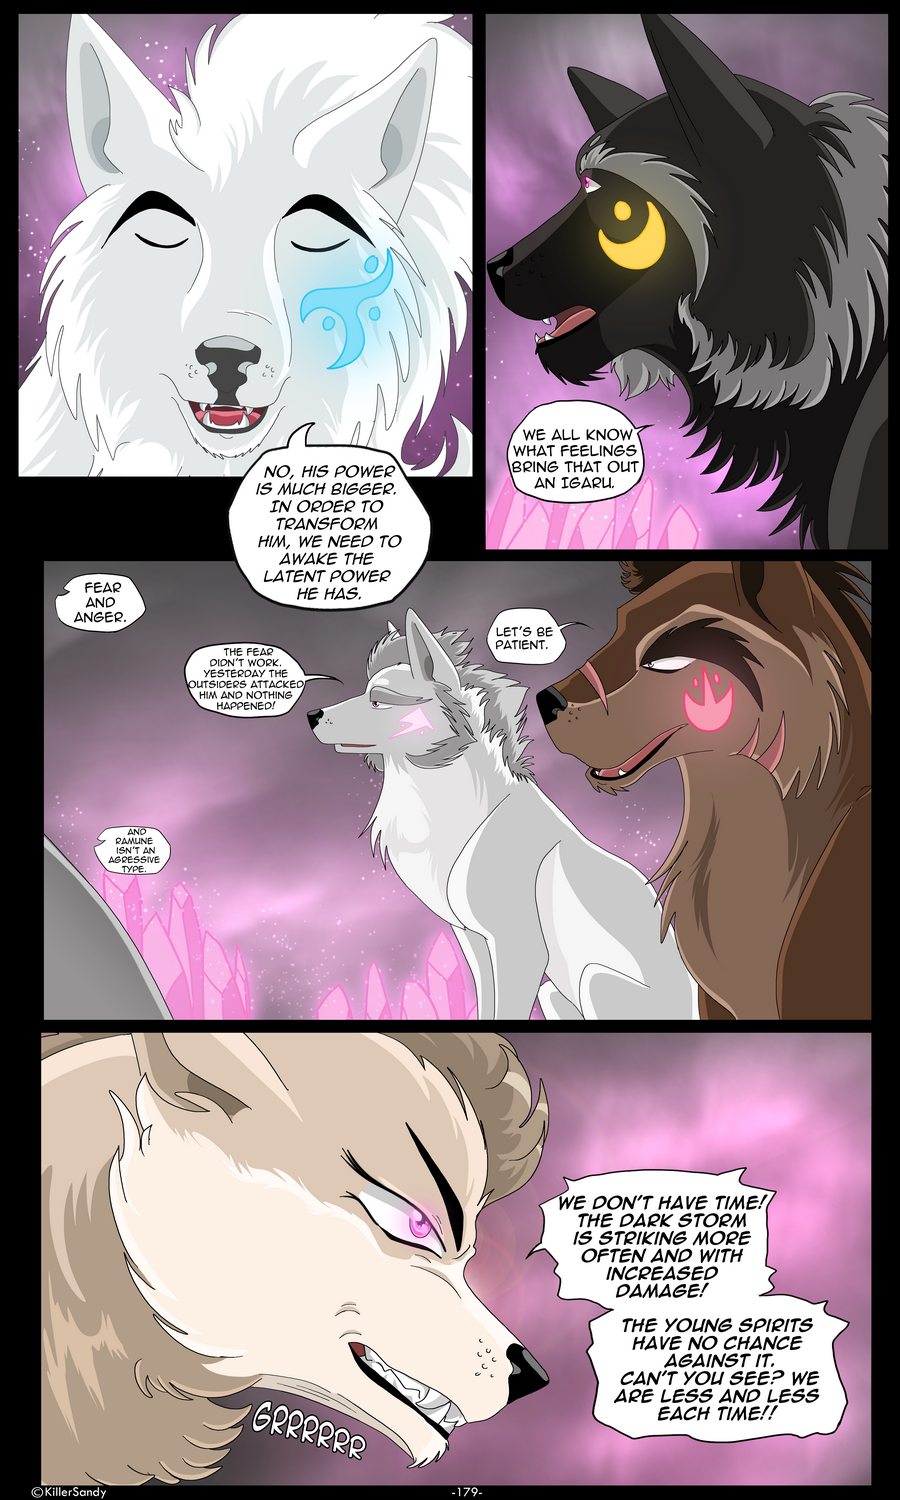 The Prince of the Moonlight Stone page 179